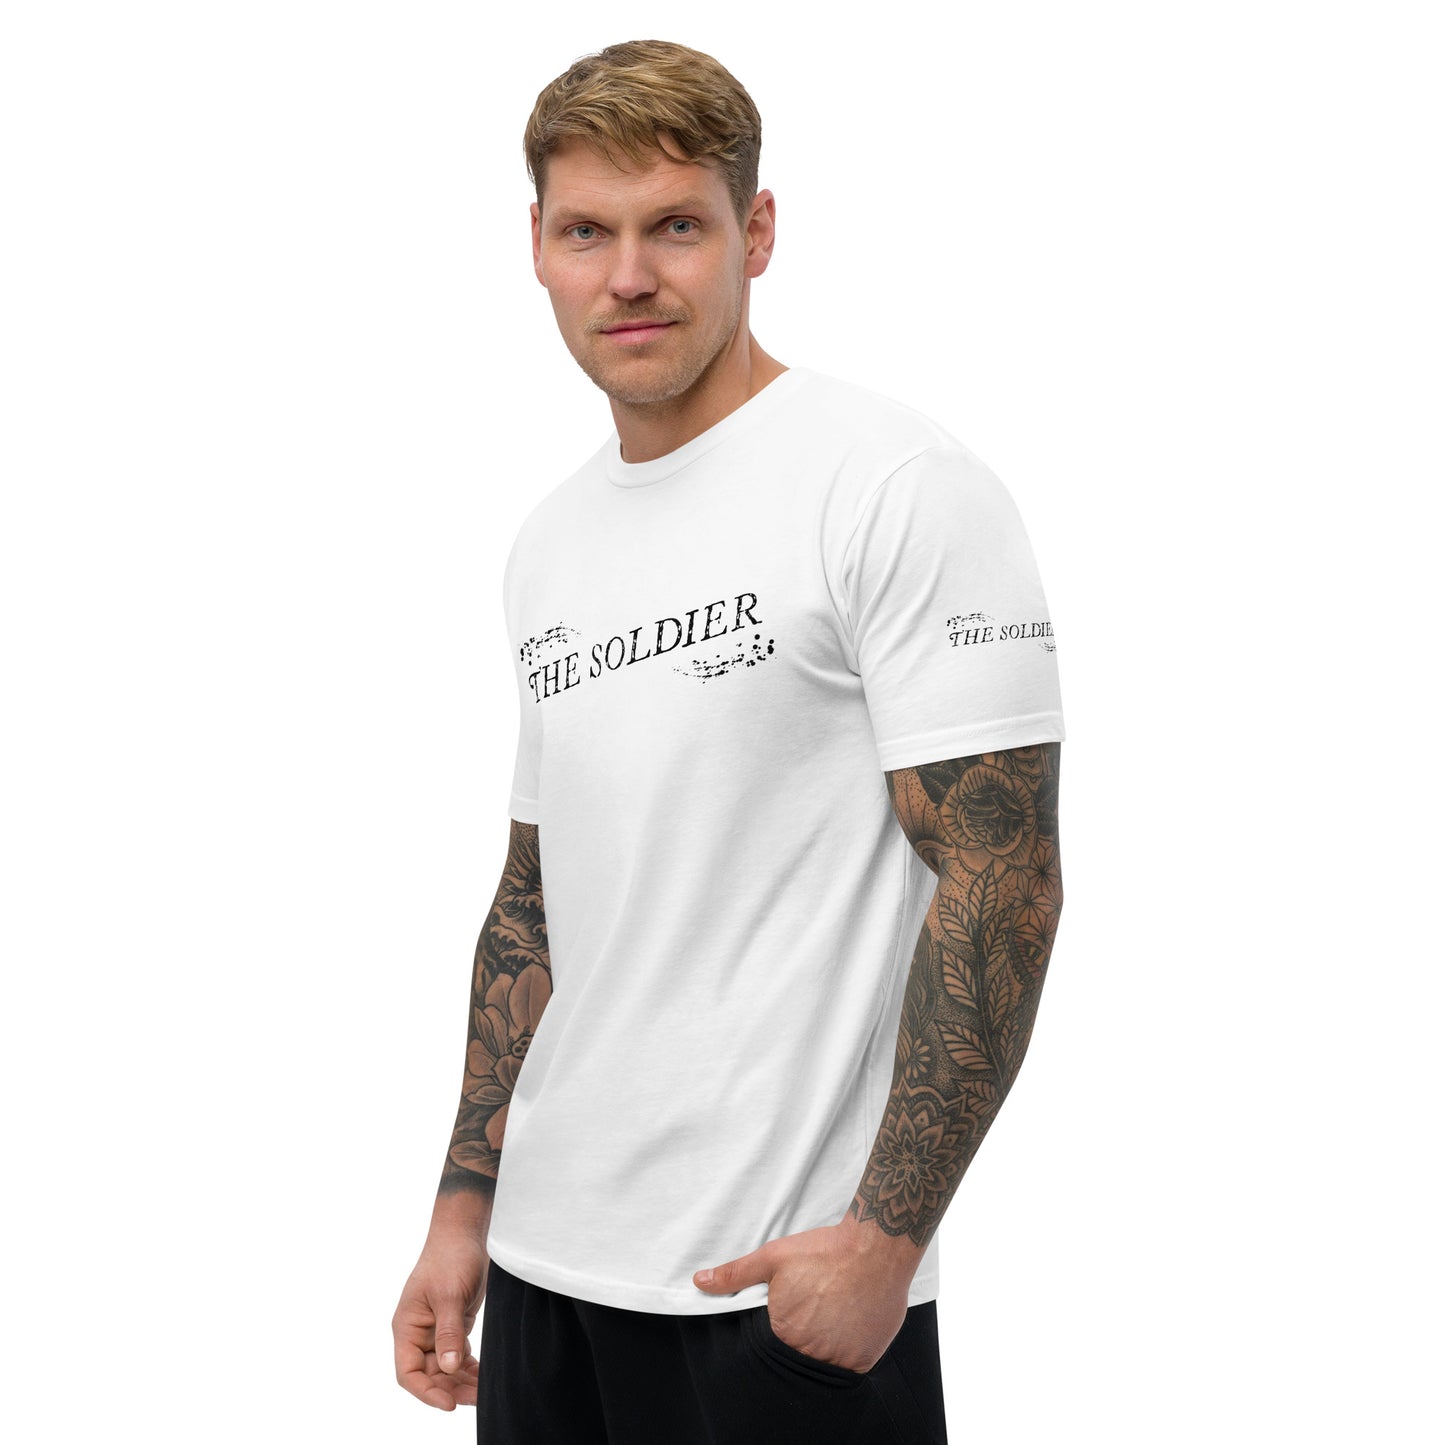 The Soldier 954 Signature Short Sleeve T-shirt